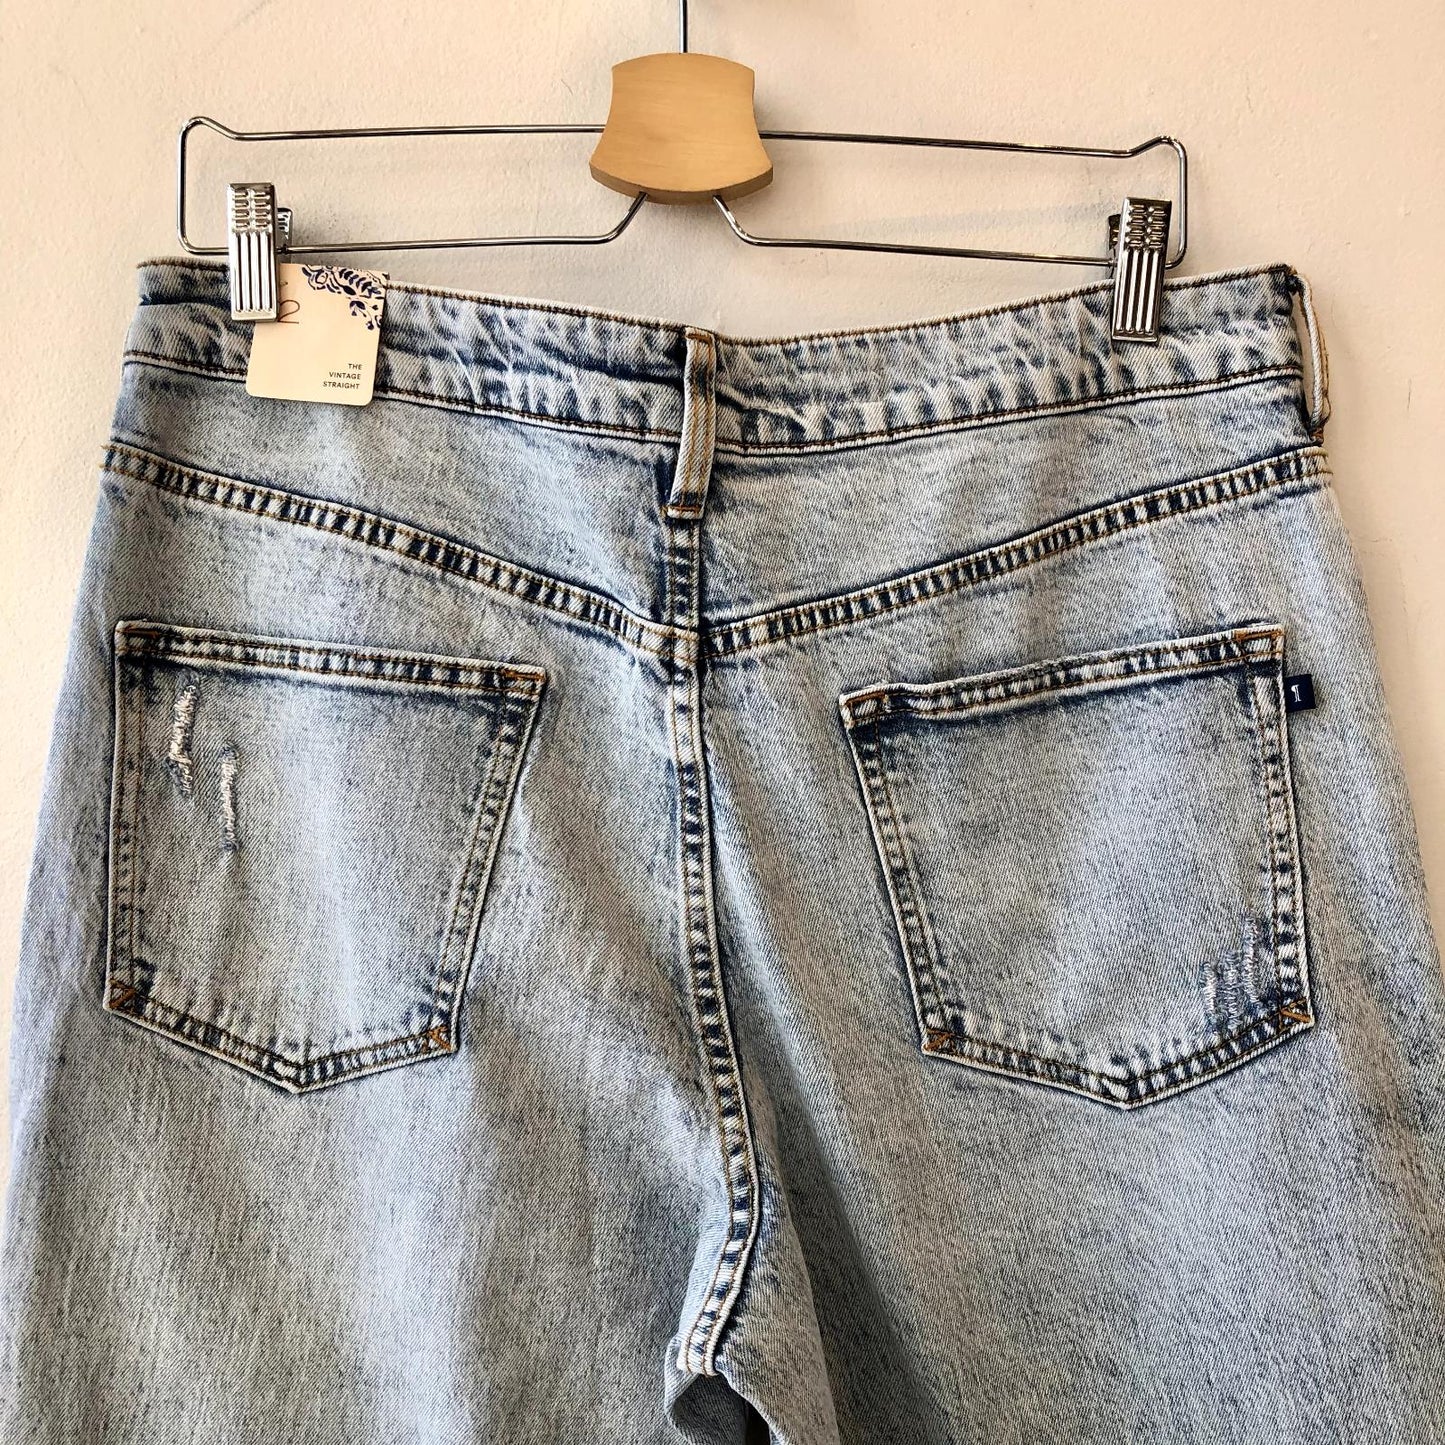 32 - Pilcro Anthropologie NEW $160 Distressed Vintage Straight Leg Jeans 0131AW